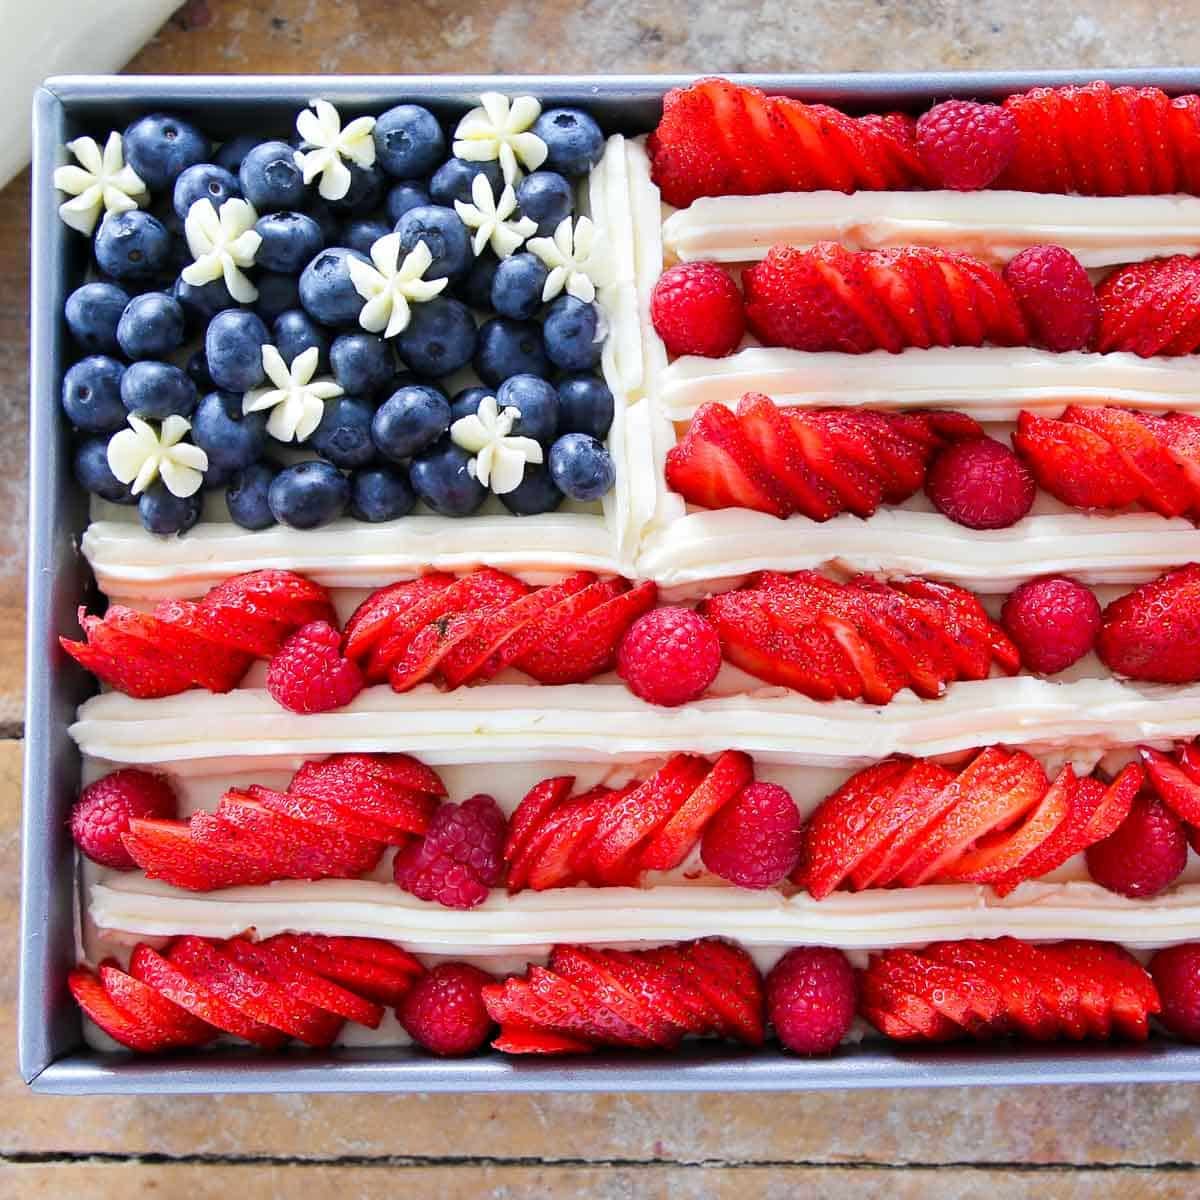 american flag cake with berries and swiss meringue buttercream.